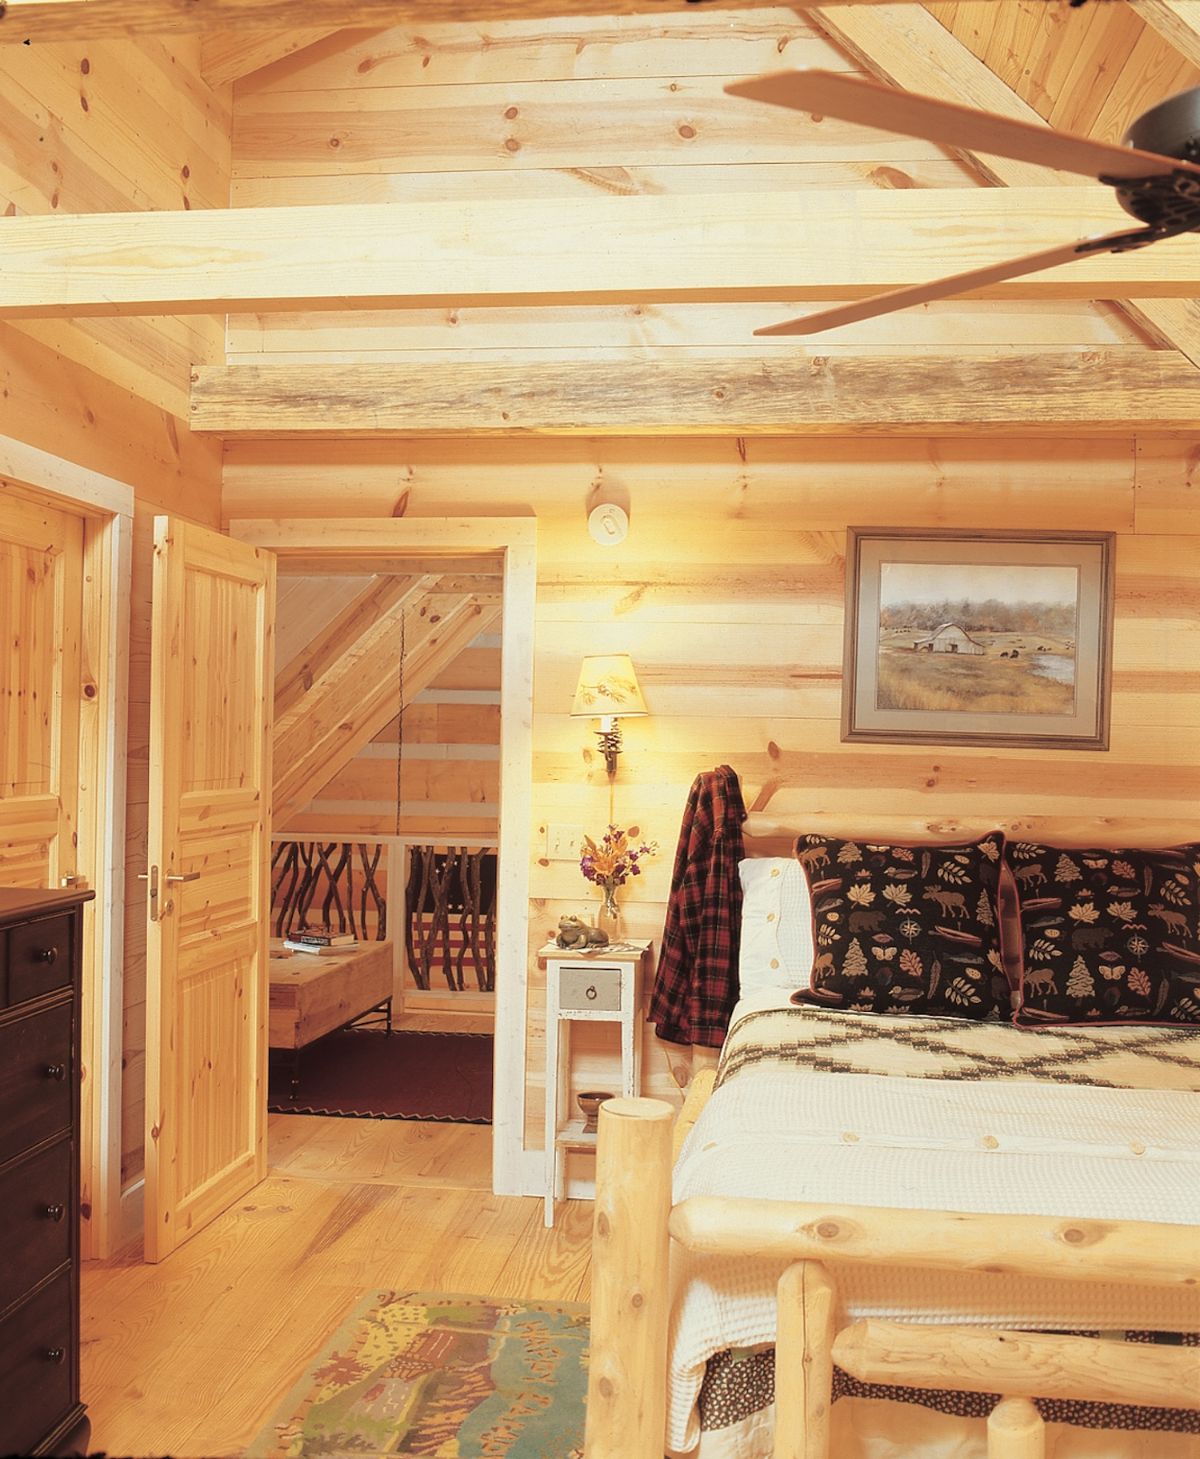 bed against light wood wall in log cabin with open door on left